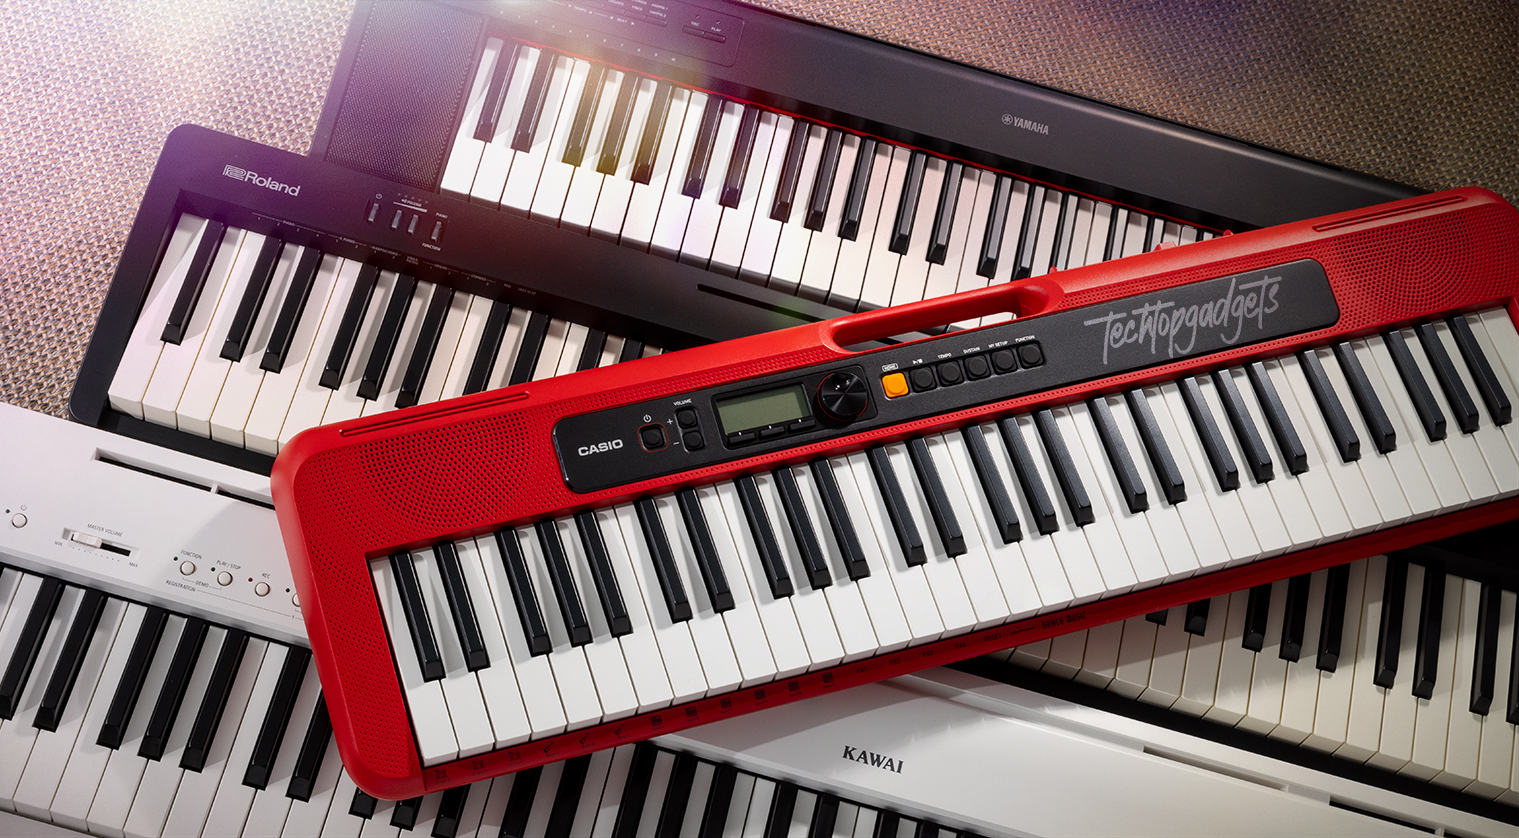 This collection represents some of the best electric pianos available, showcasing a range of sizes, colors, and brands for side-by-side comparison.